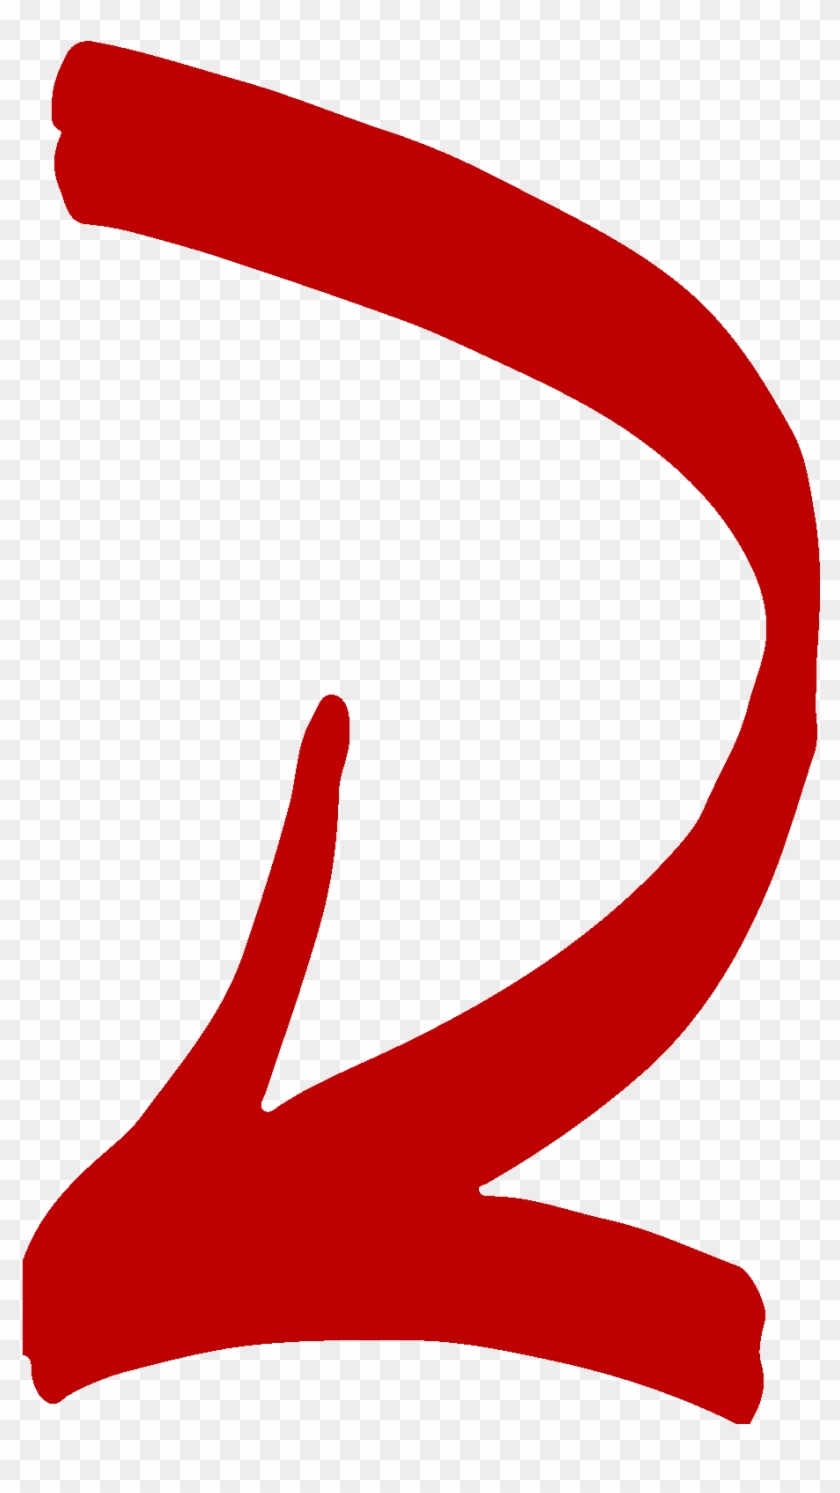 Curved Arrow Drawn Parallel To Curved Line Curved Arrow